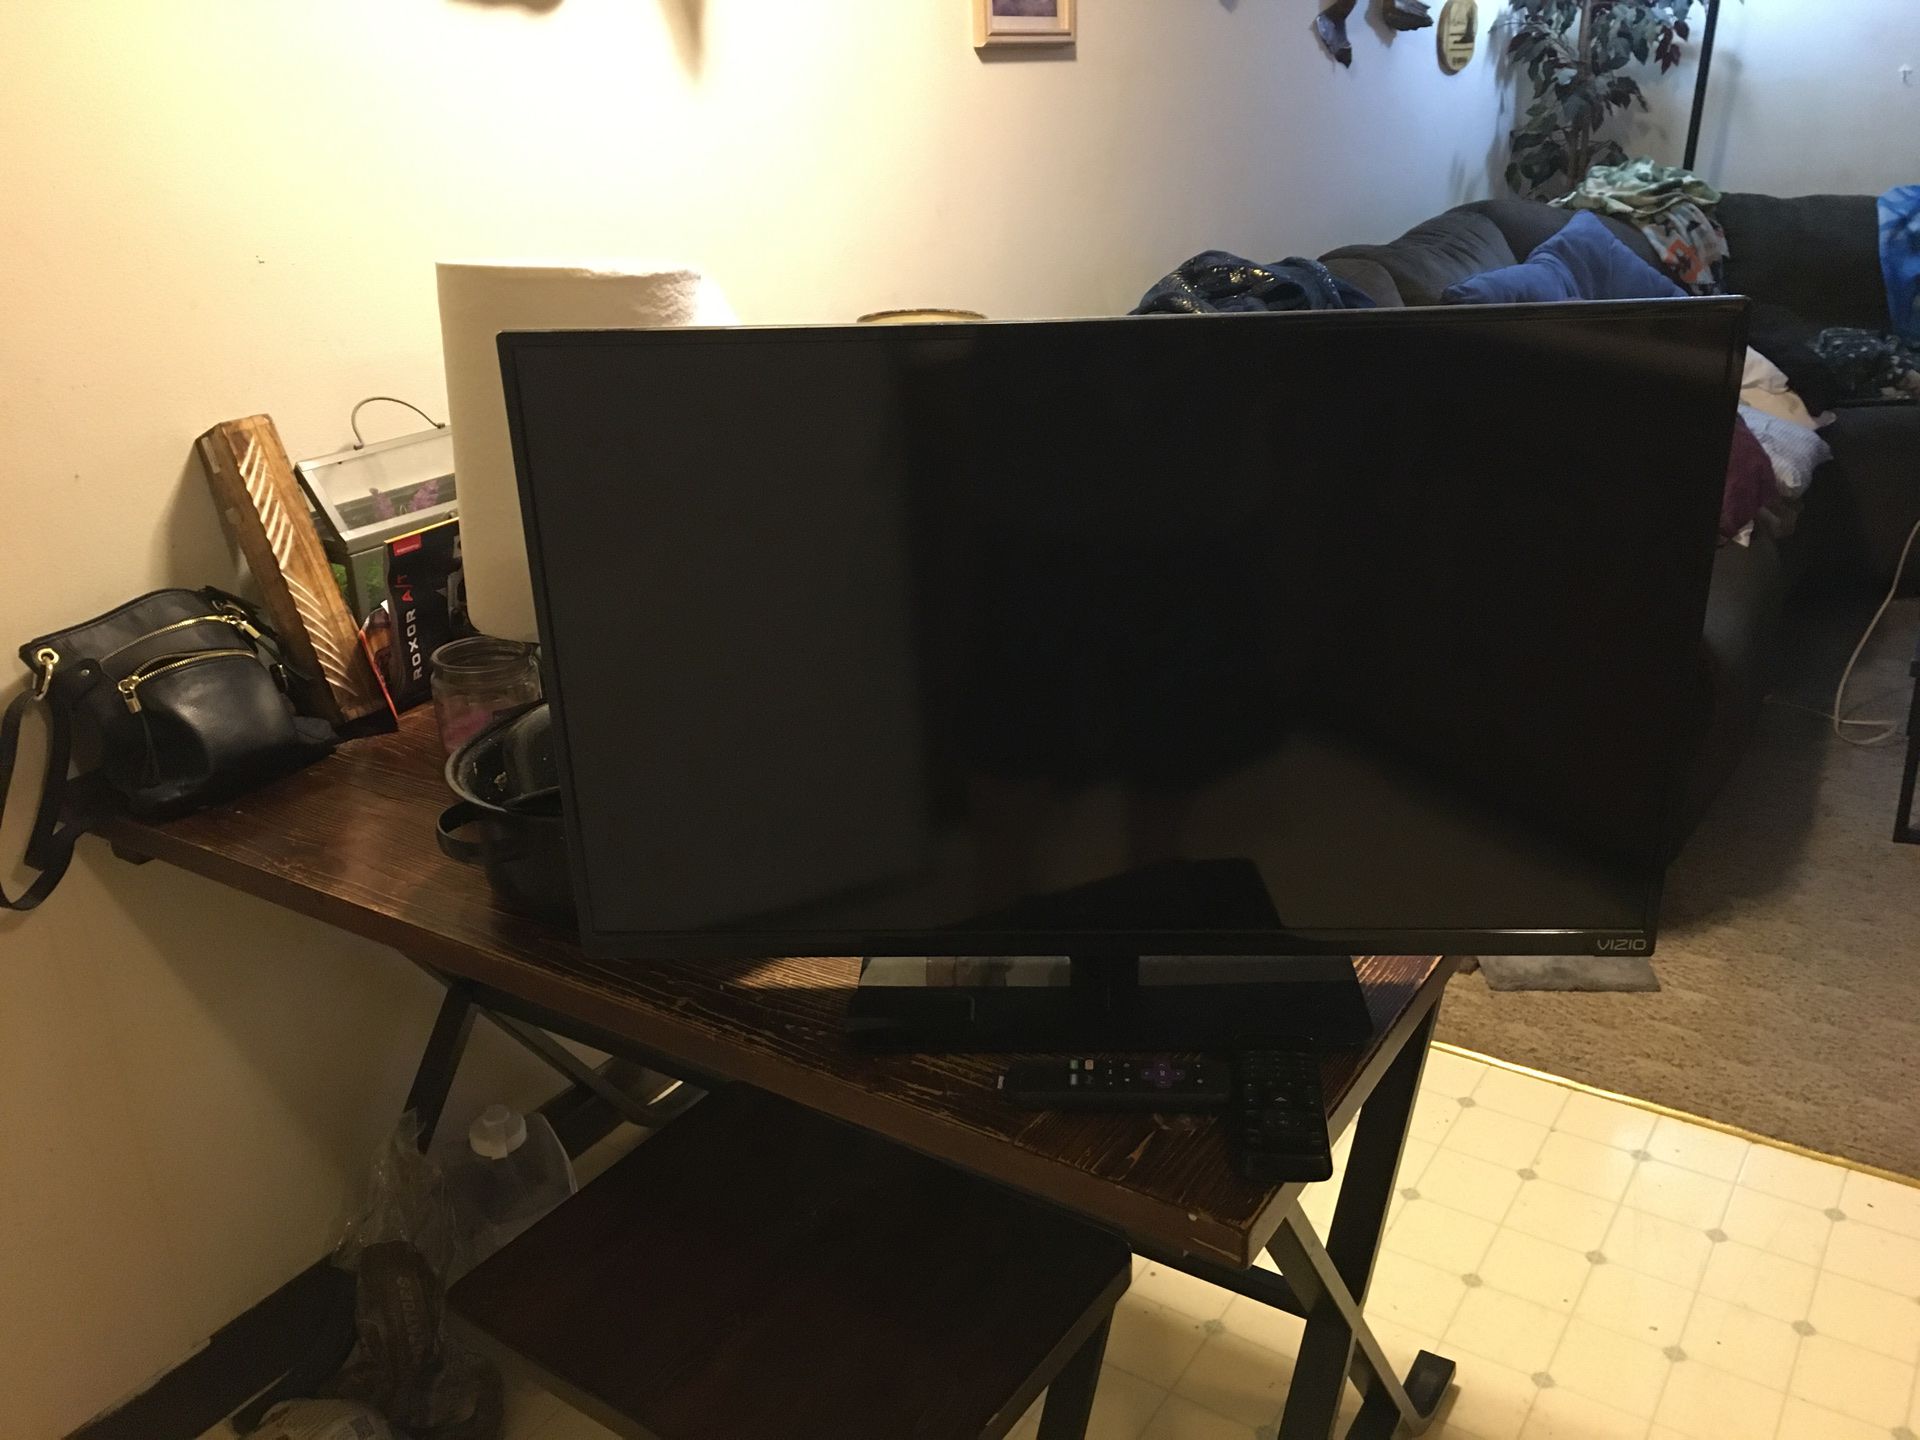 32” flat screen tv with Roku it’s like brand new and works perfect...perfect for a bedroom as that’s what we were using it but now we are moving and